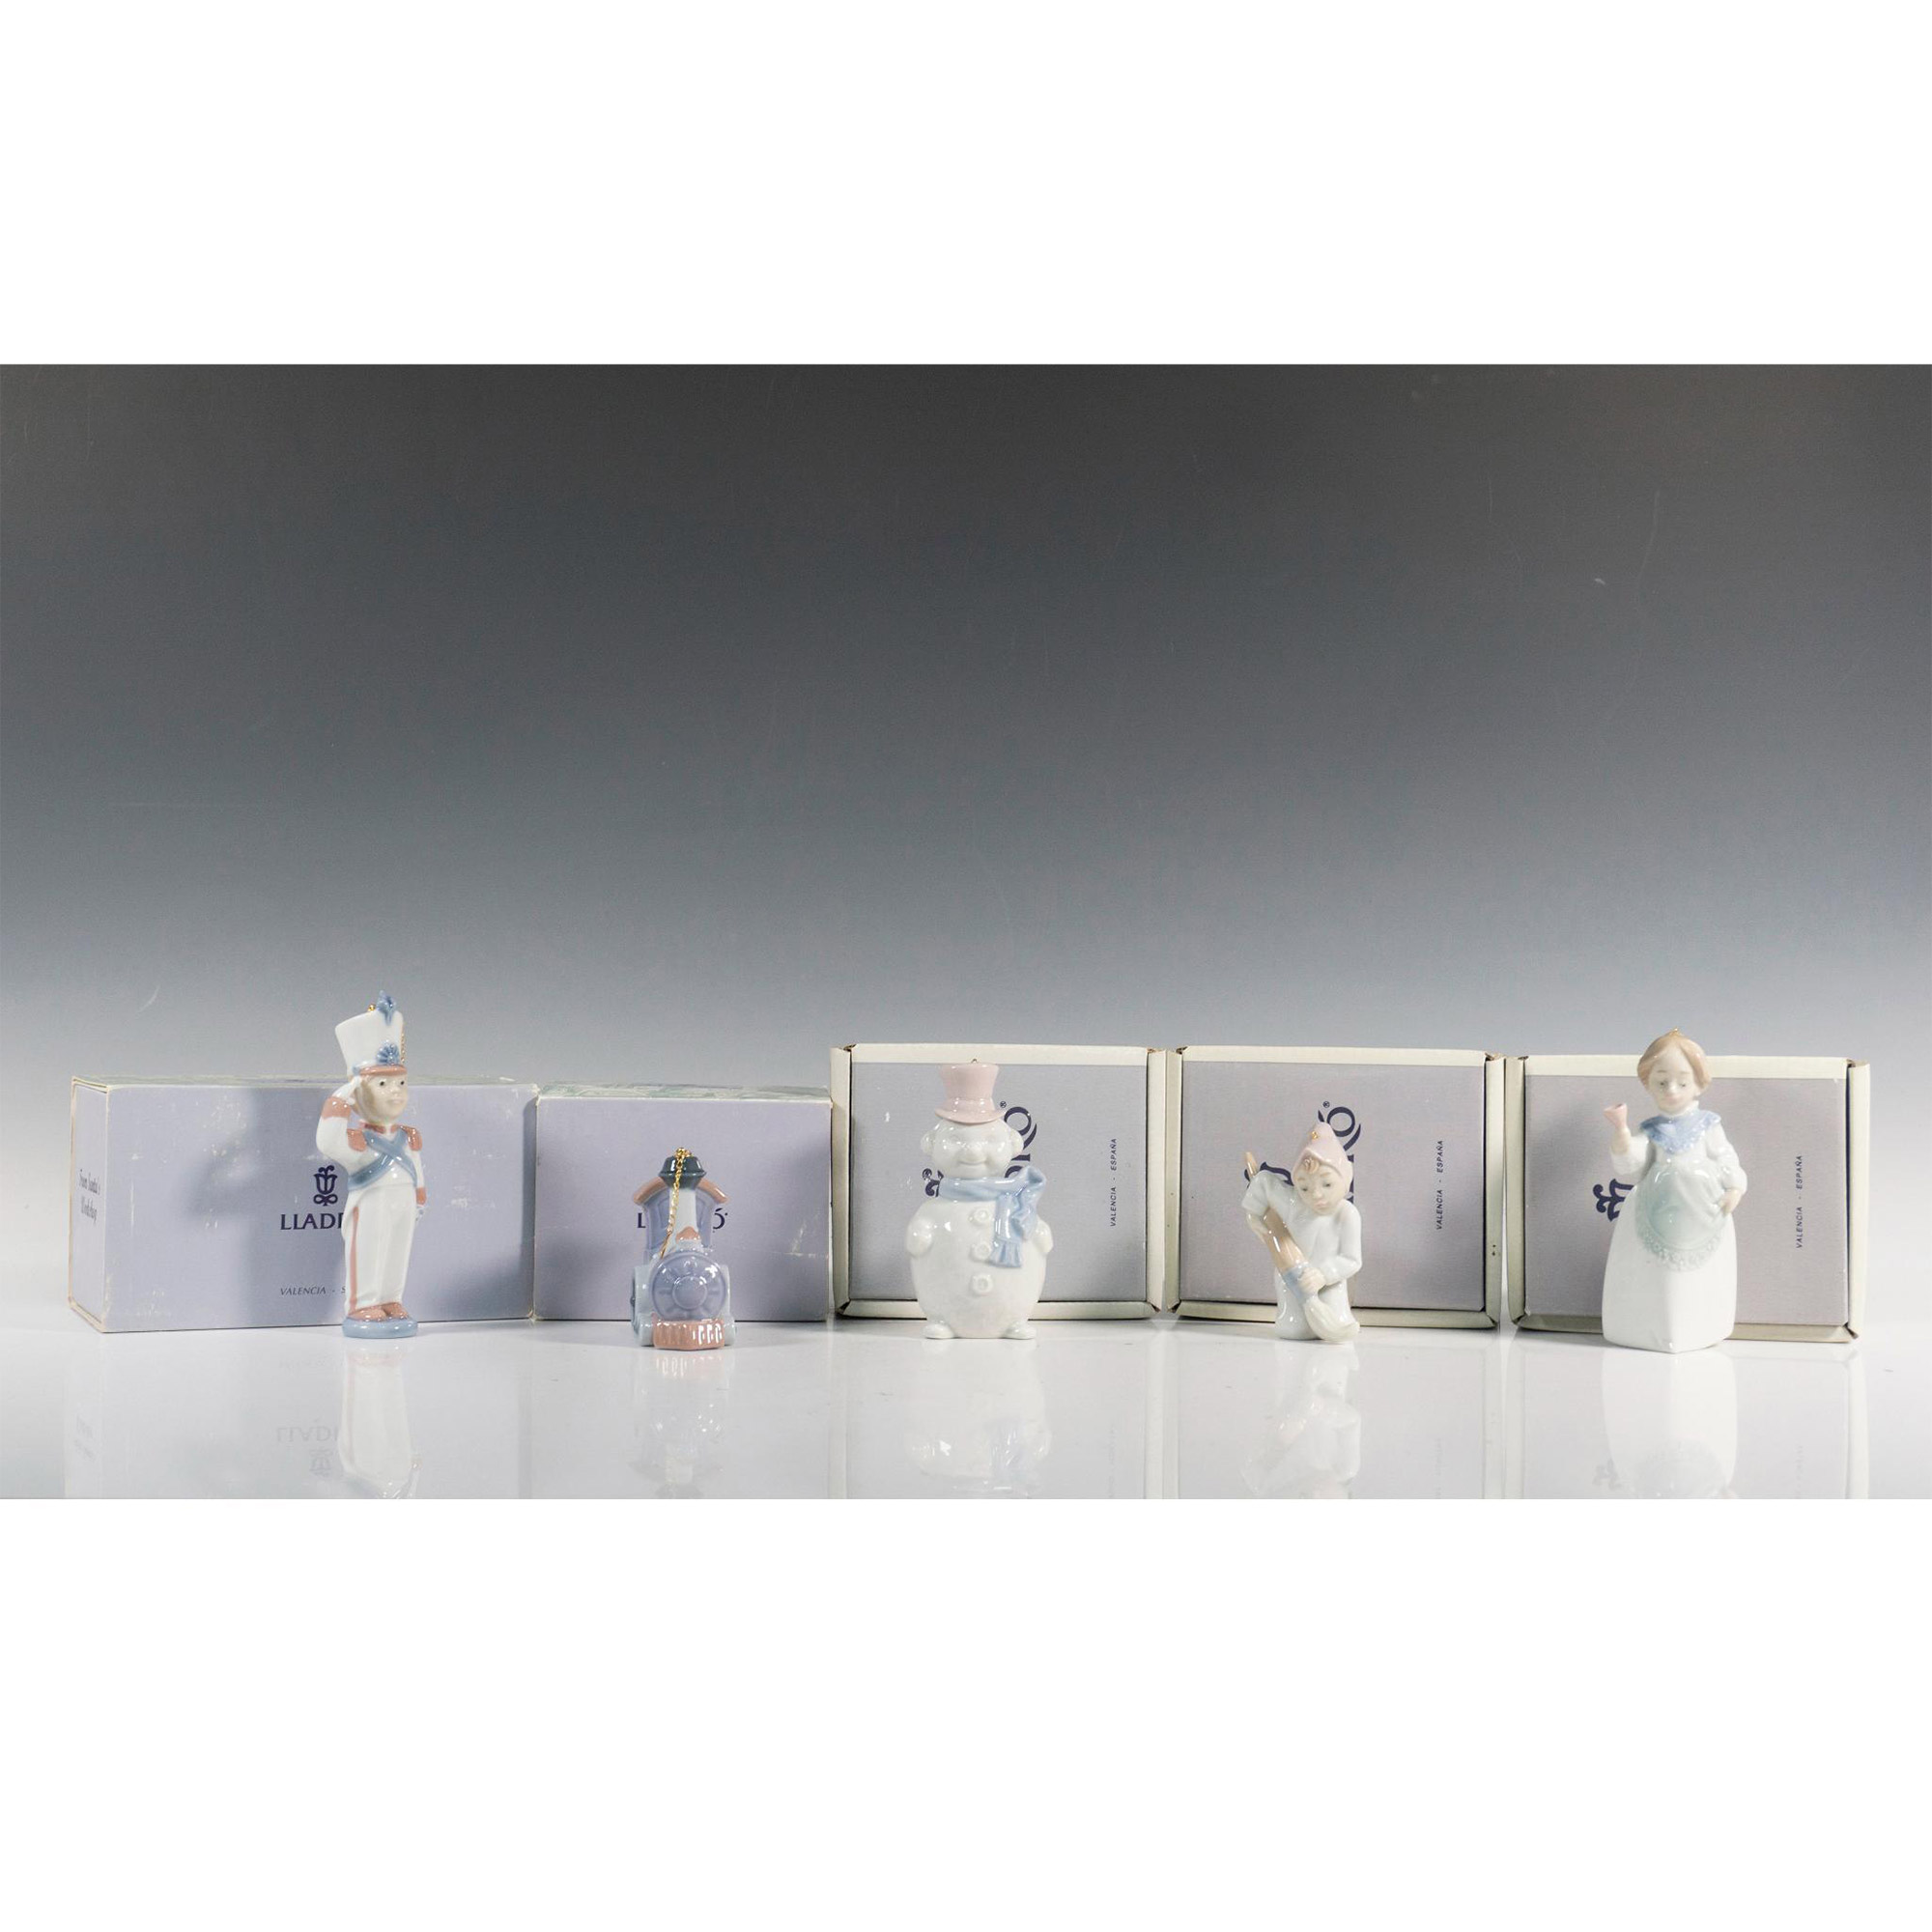 5pc Lladro Porcelain Figural Christmas Ornaments - Image 3 of 5